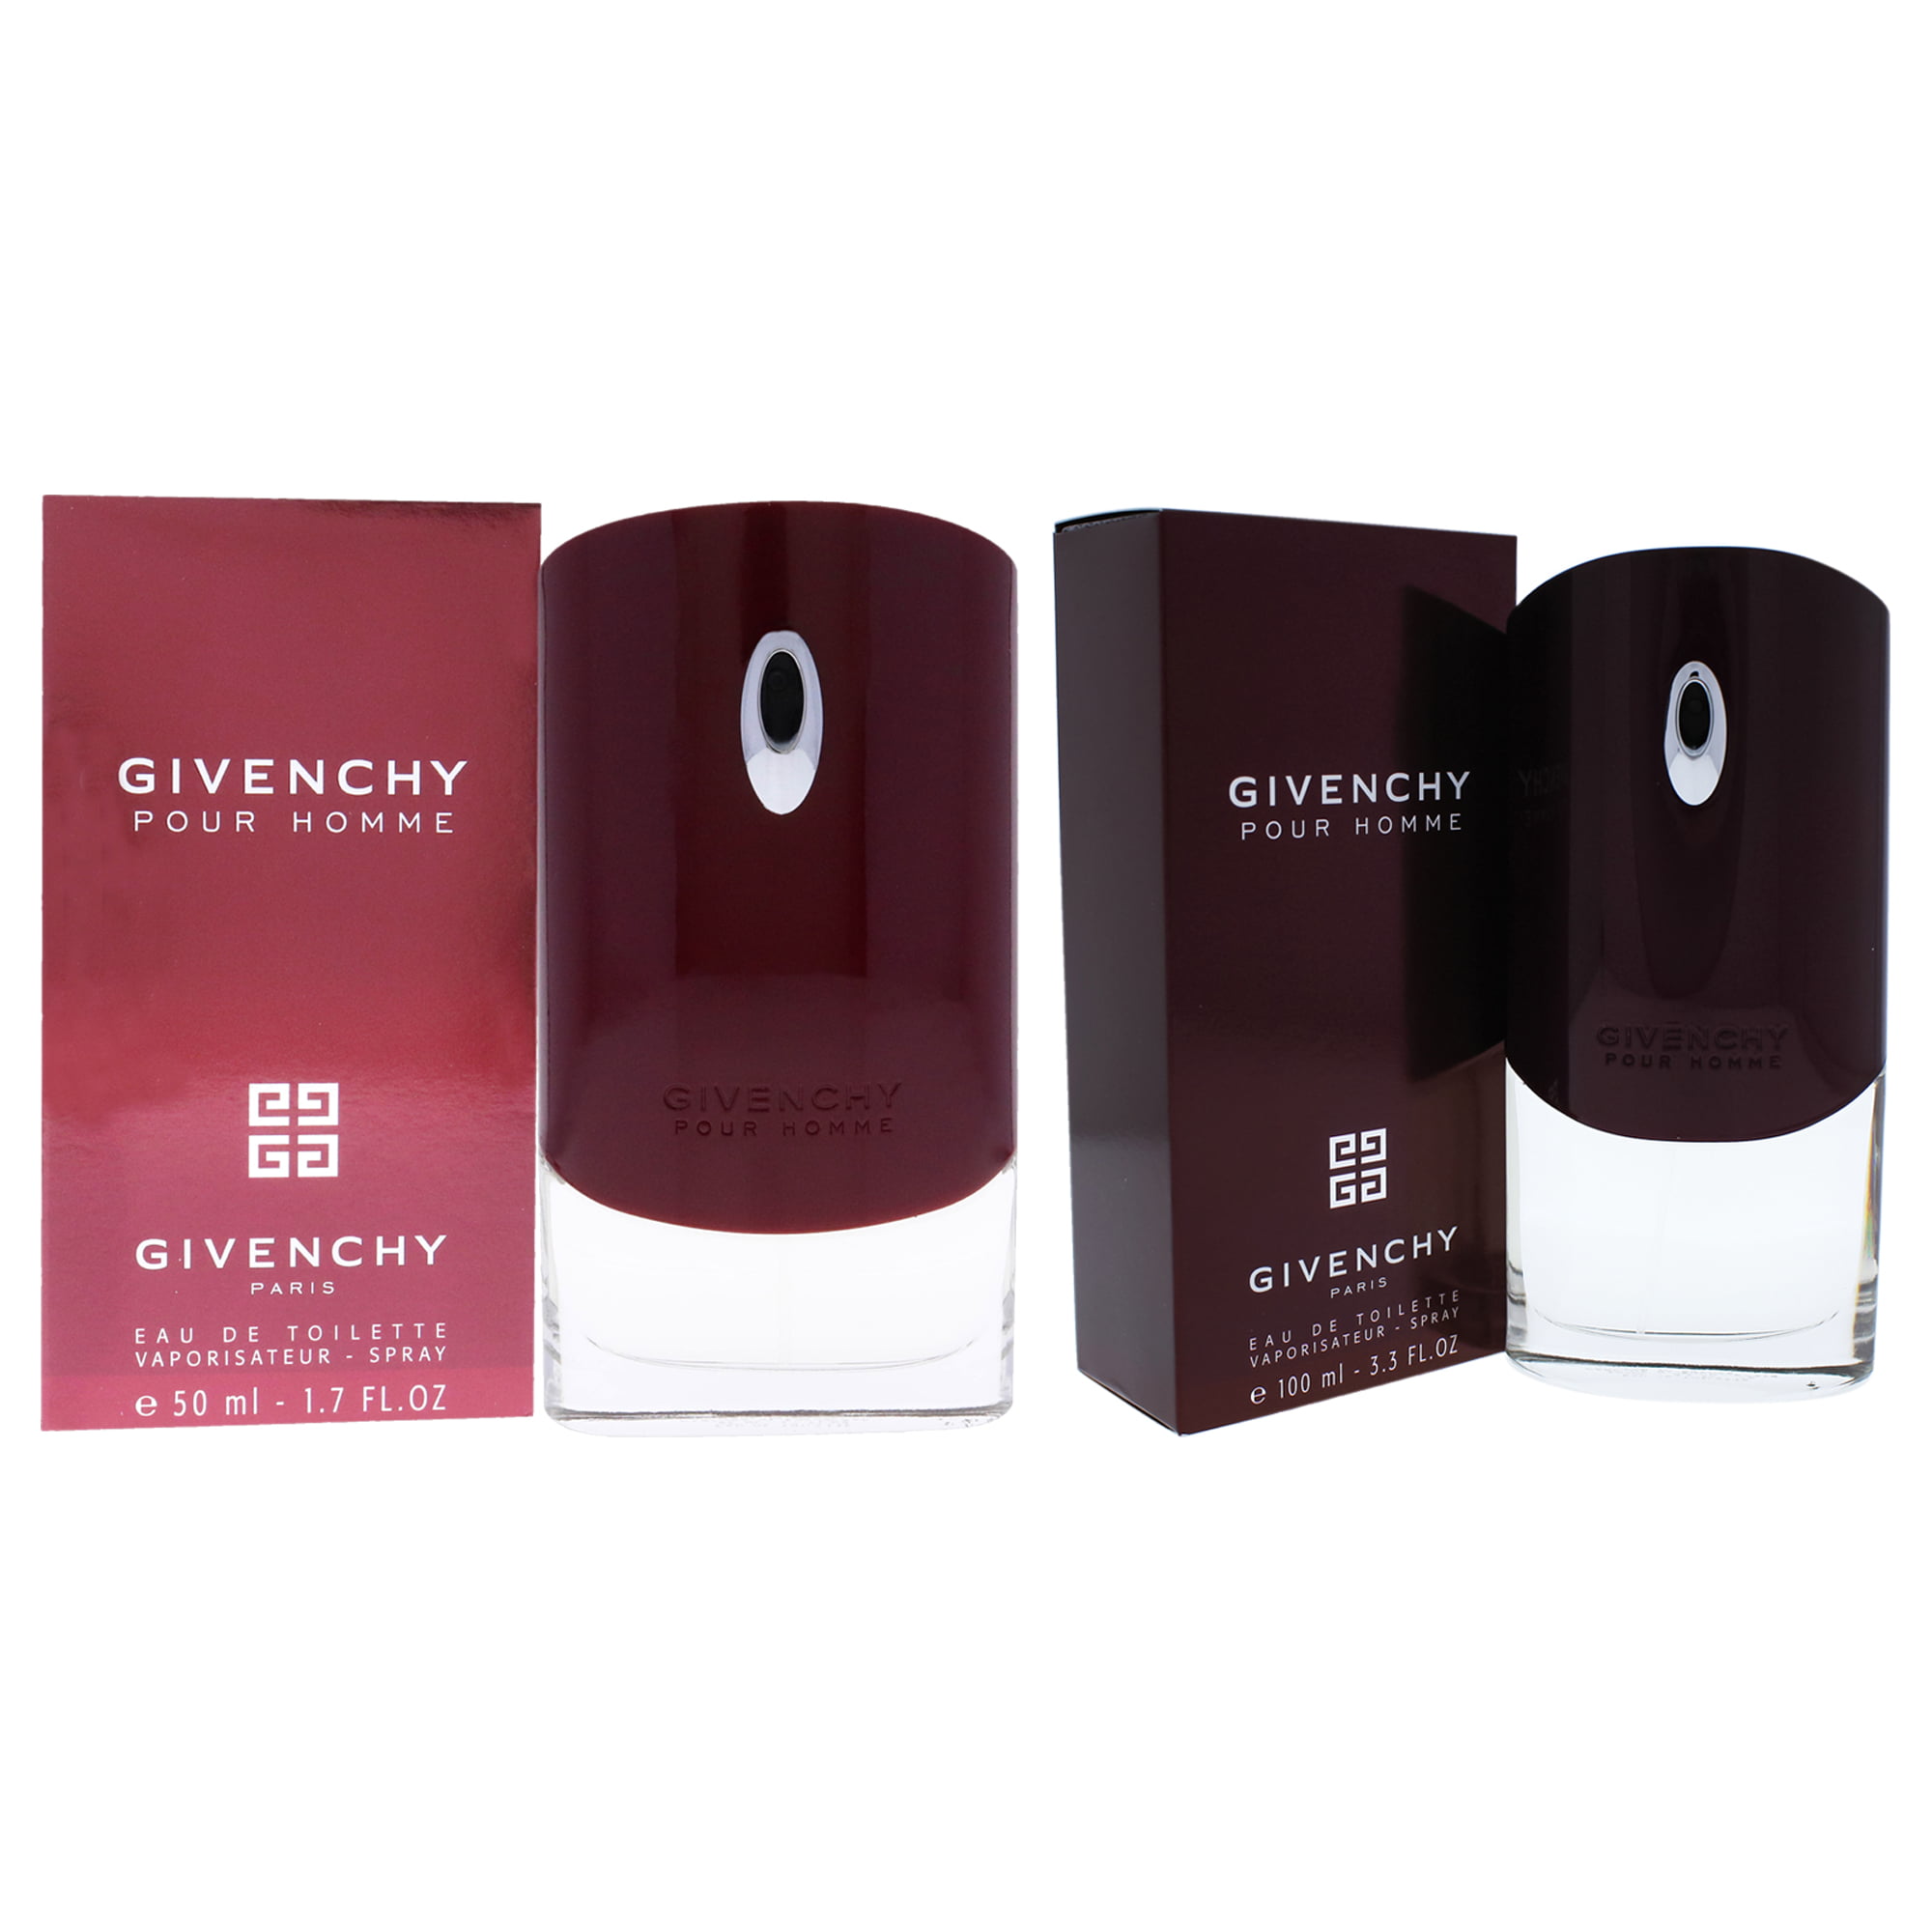 Givenchy pour homme 100. Givenchy pour homme коробка. Givenchy pour homme Blue Label. Реплика Givenchy pour homme. Живанши Пьюр хоум.